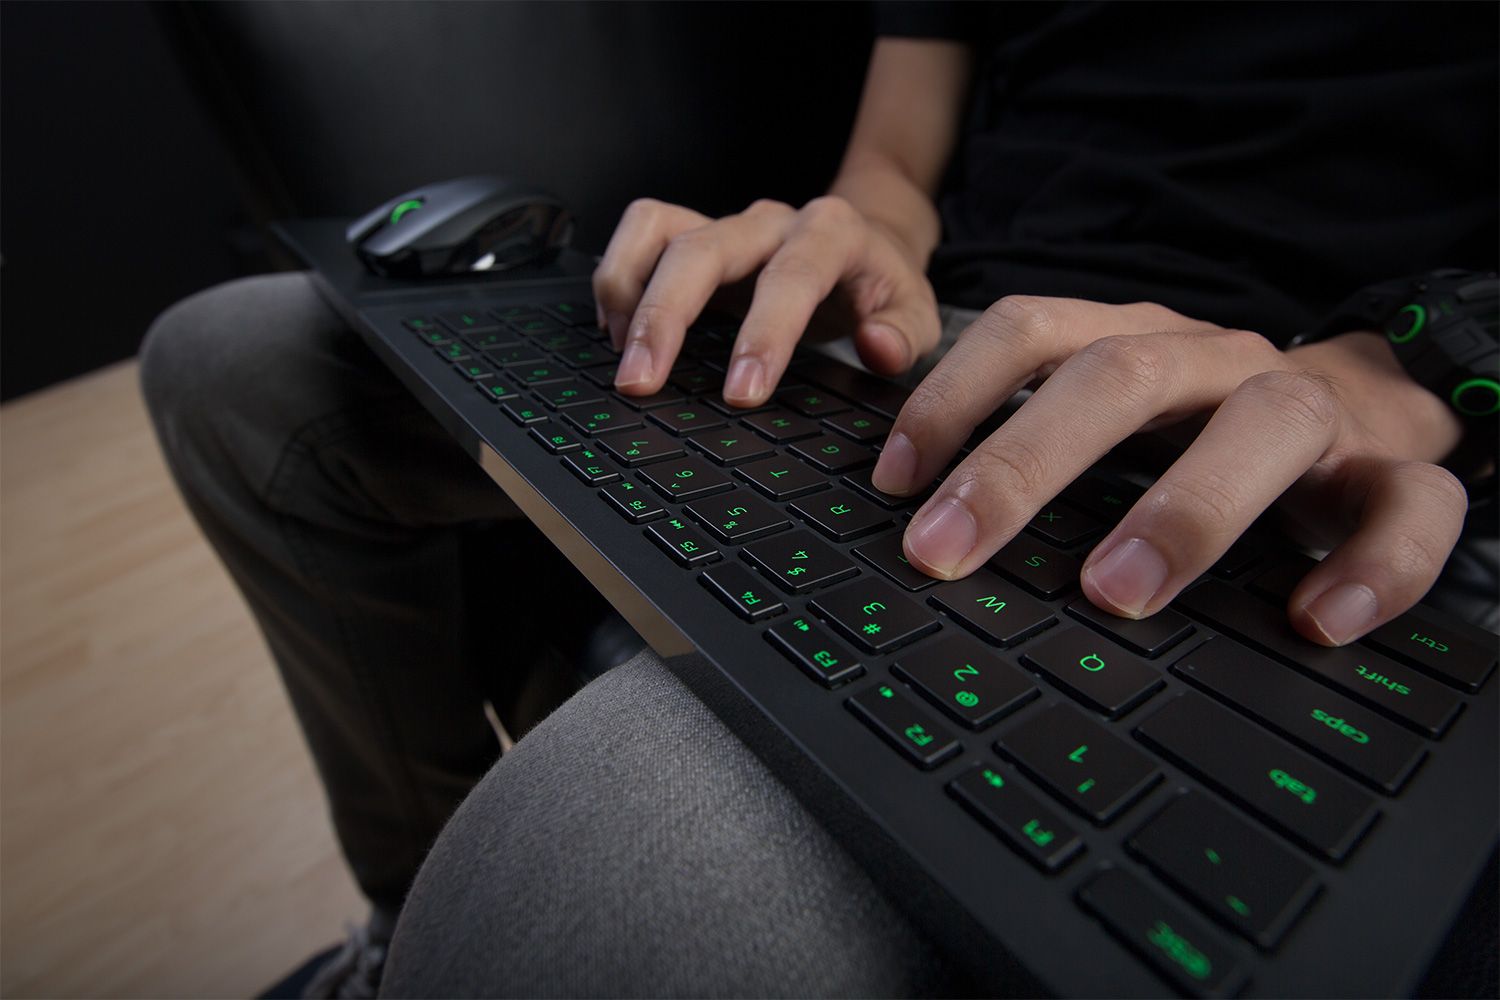 Keyboard and mouse controls finally hit Xbox One this week | Ars Technica